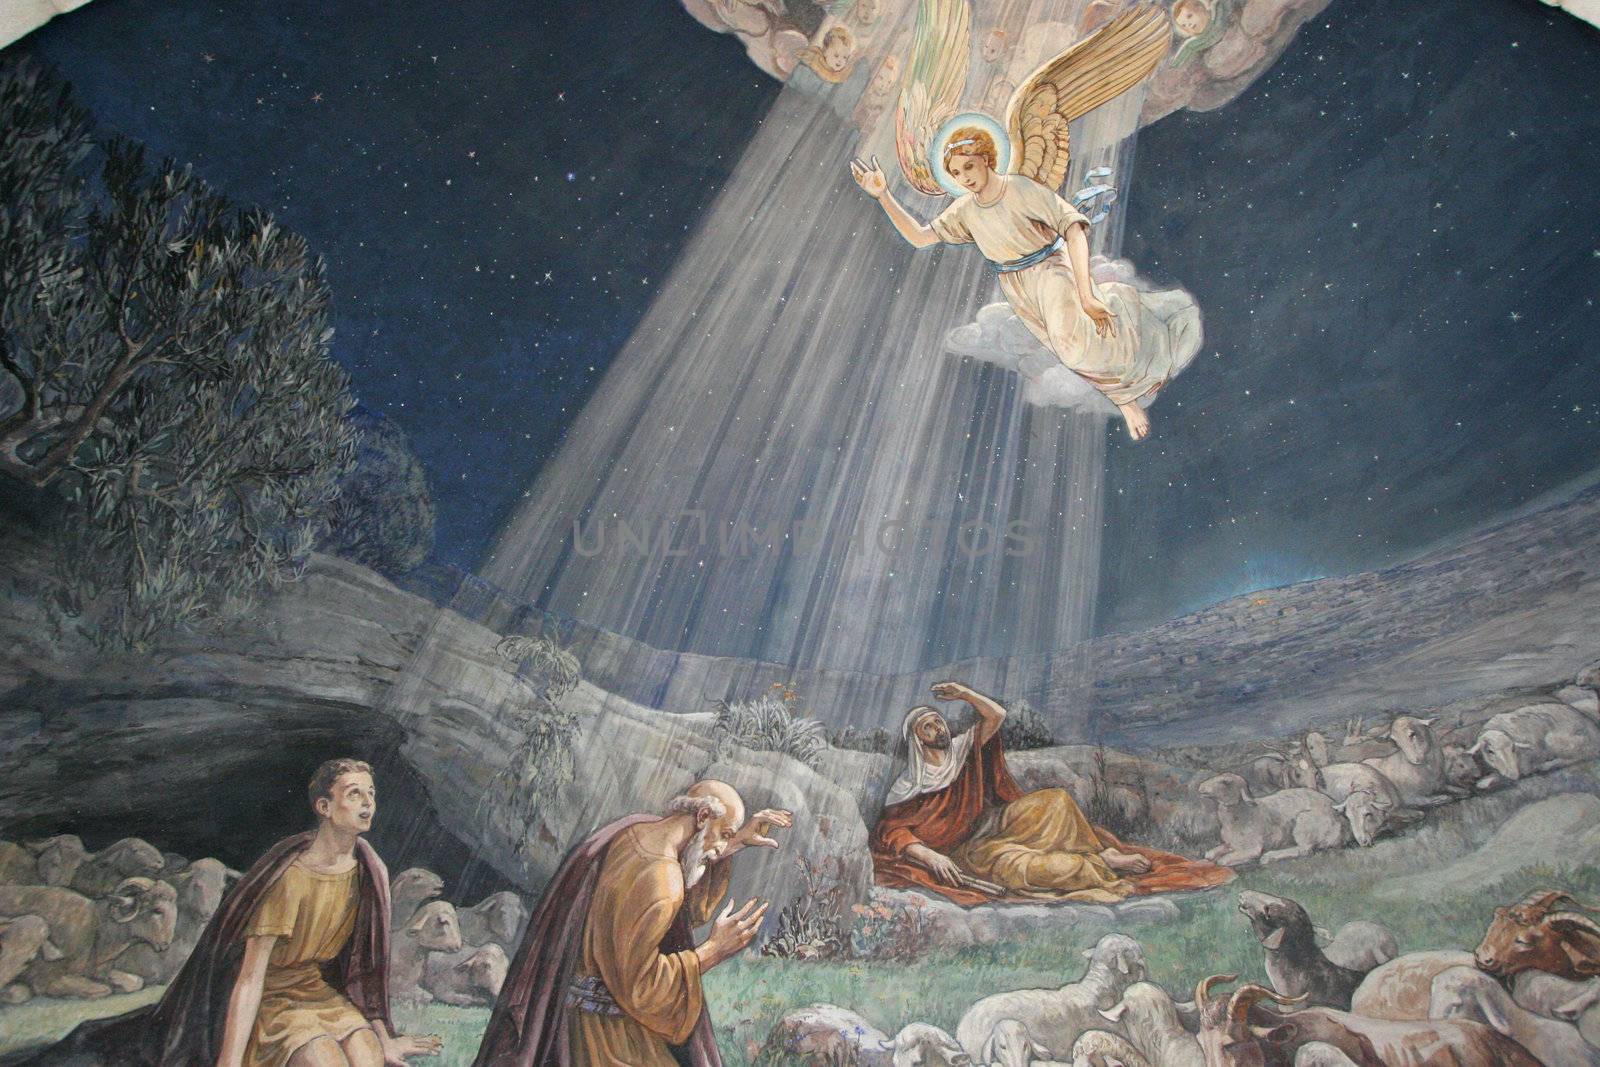 Angel of the Lord visited the shepherds and informed them of Jesus' birth, Bethlehem, Church at the Shepherds' Fields